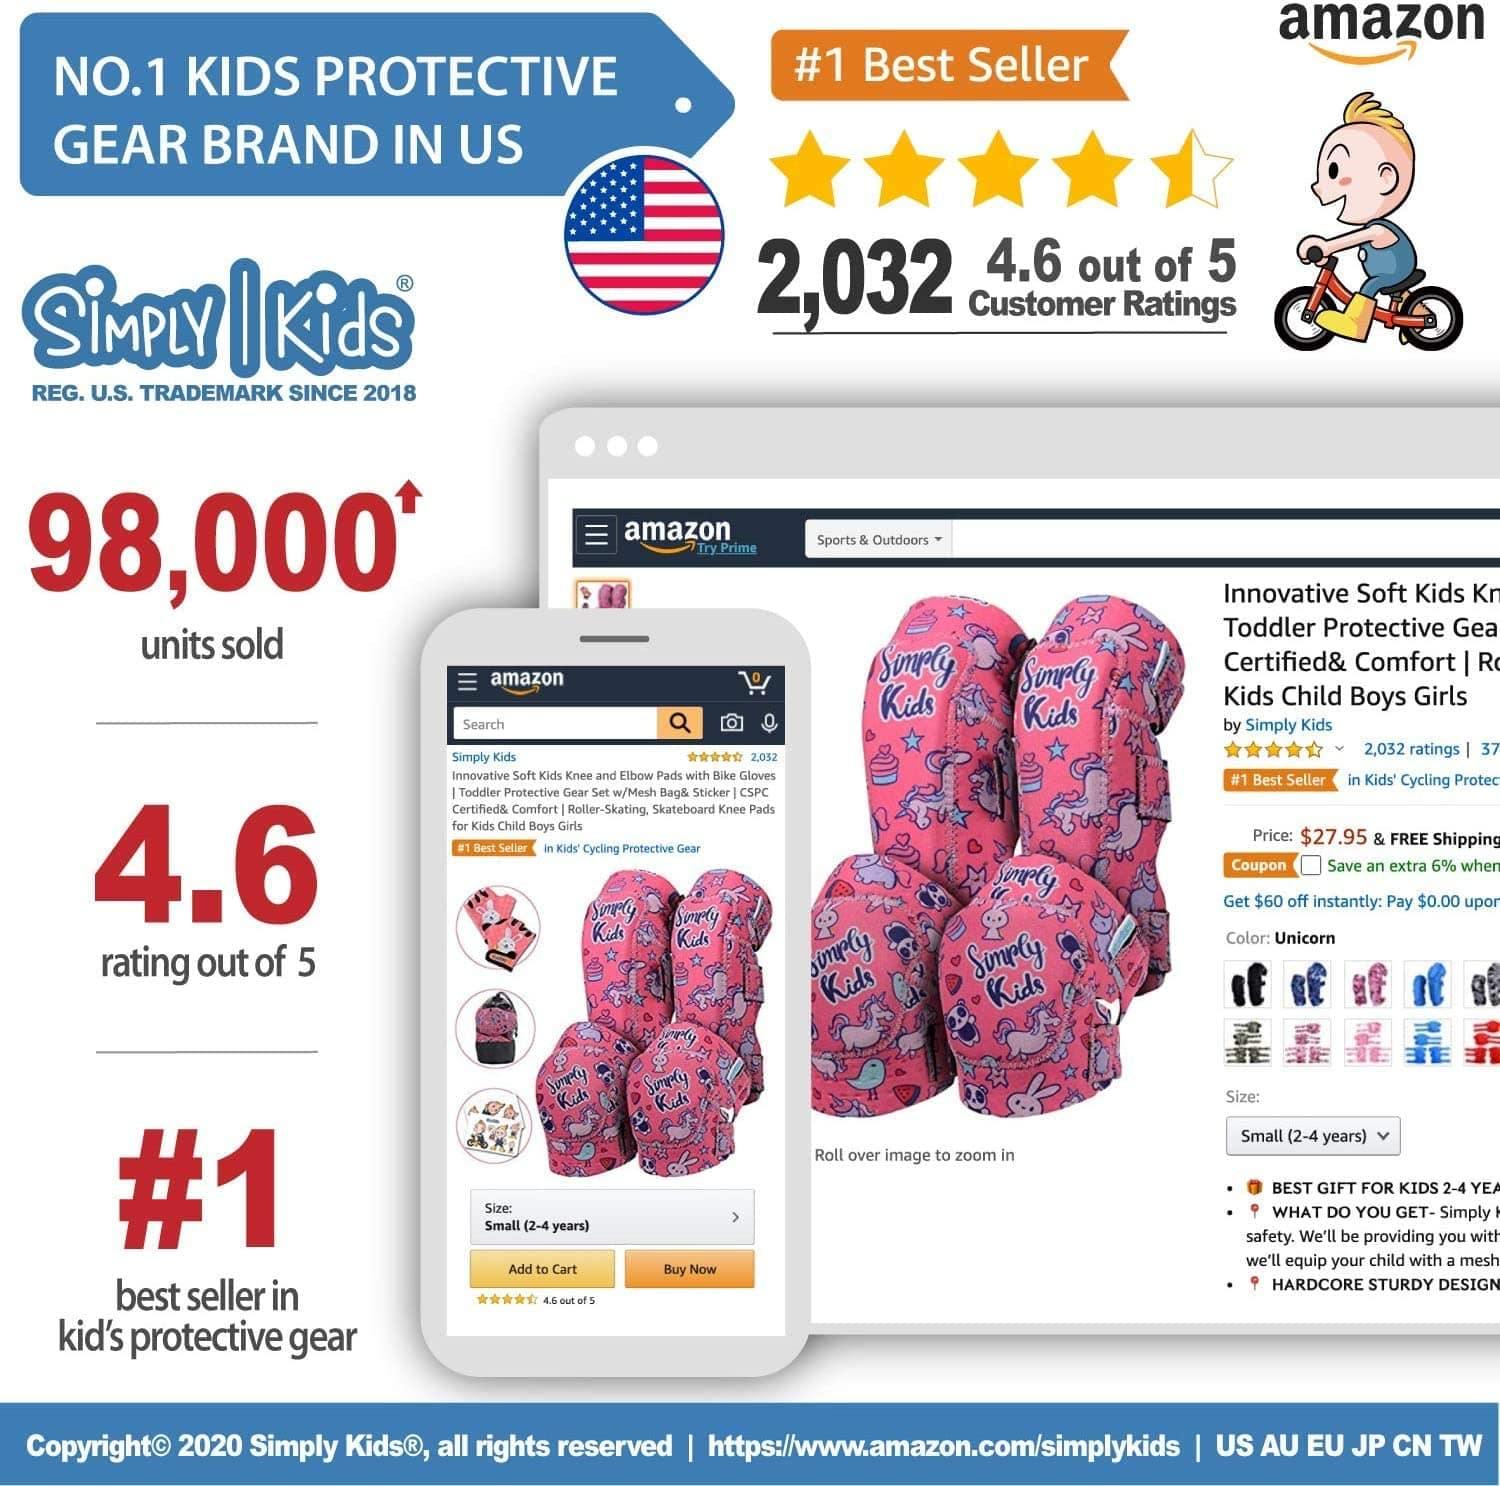 [1st Gen.] Innovative Soft Kids Elbow and Knee Pads with Bike Gloves (Pure Red)